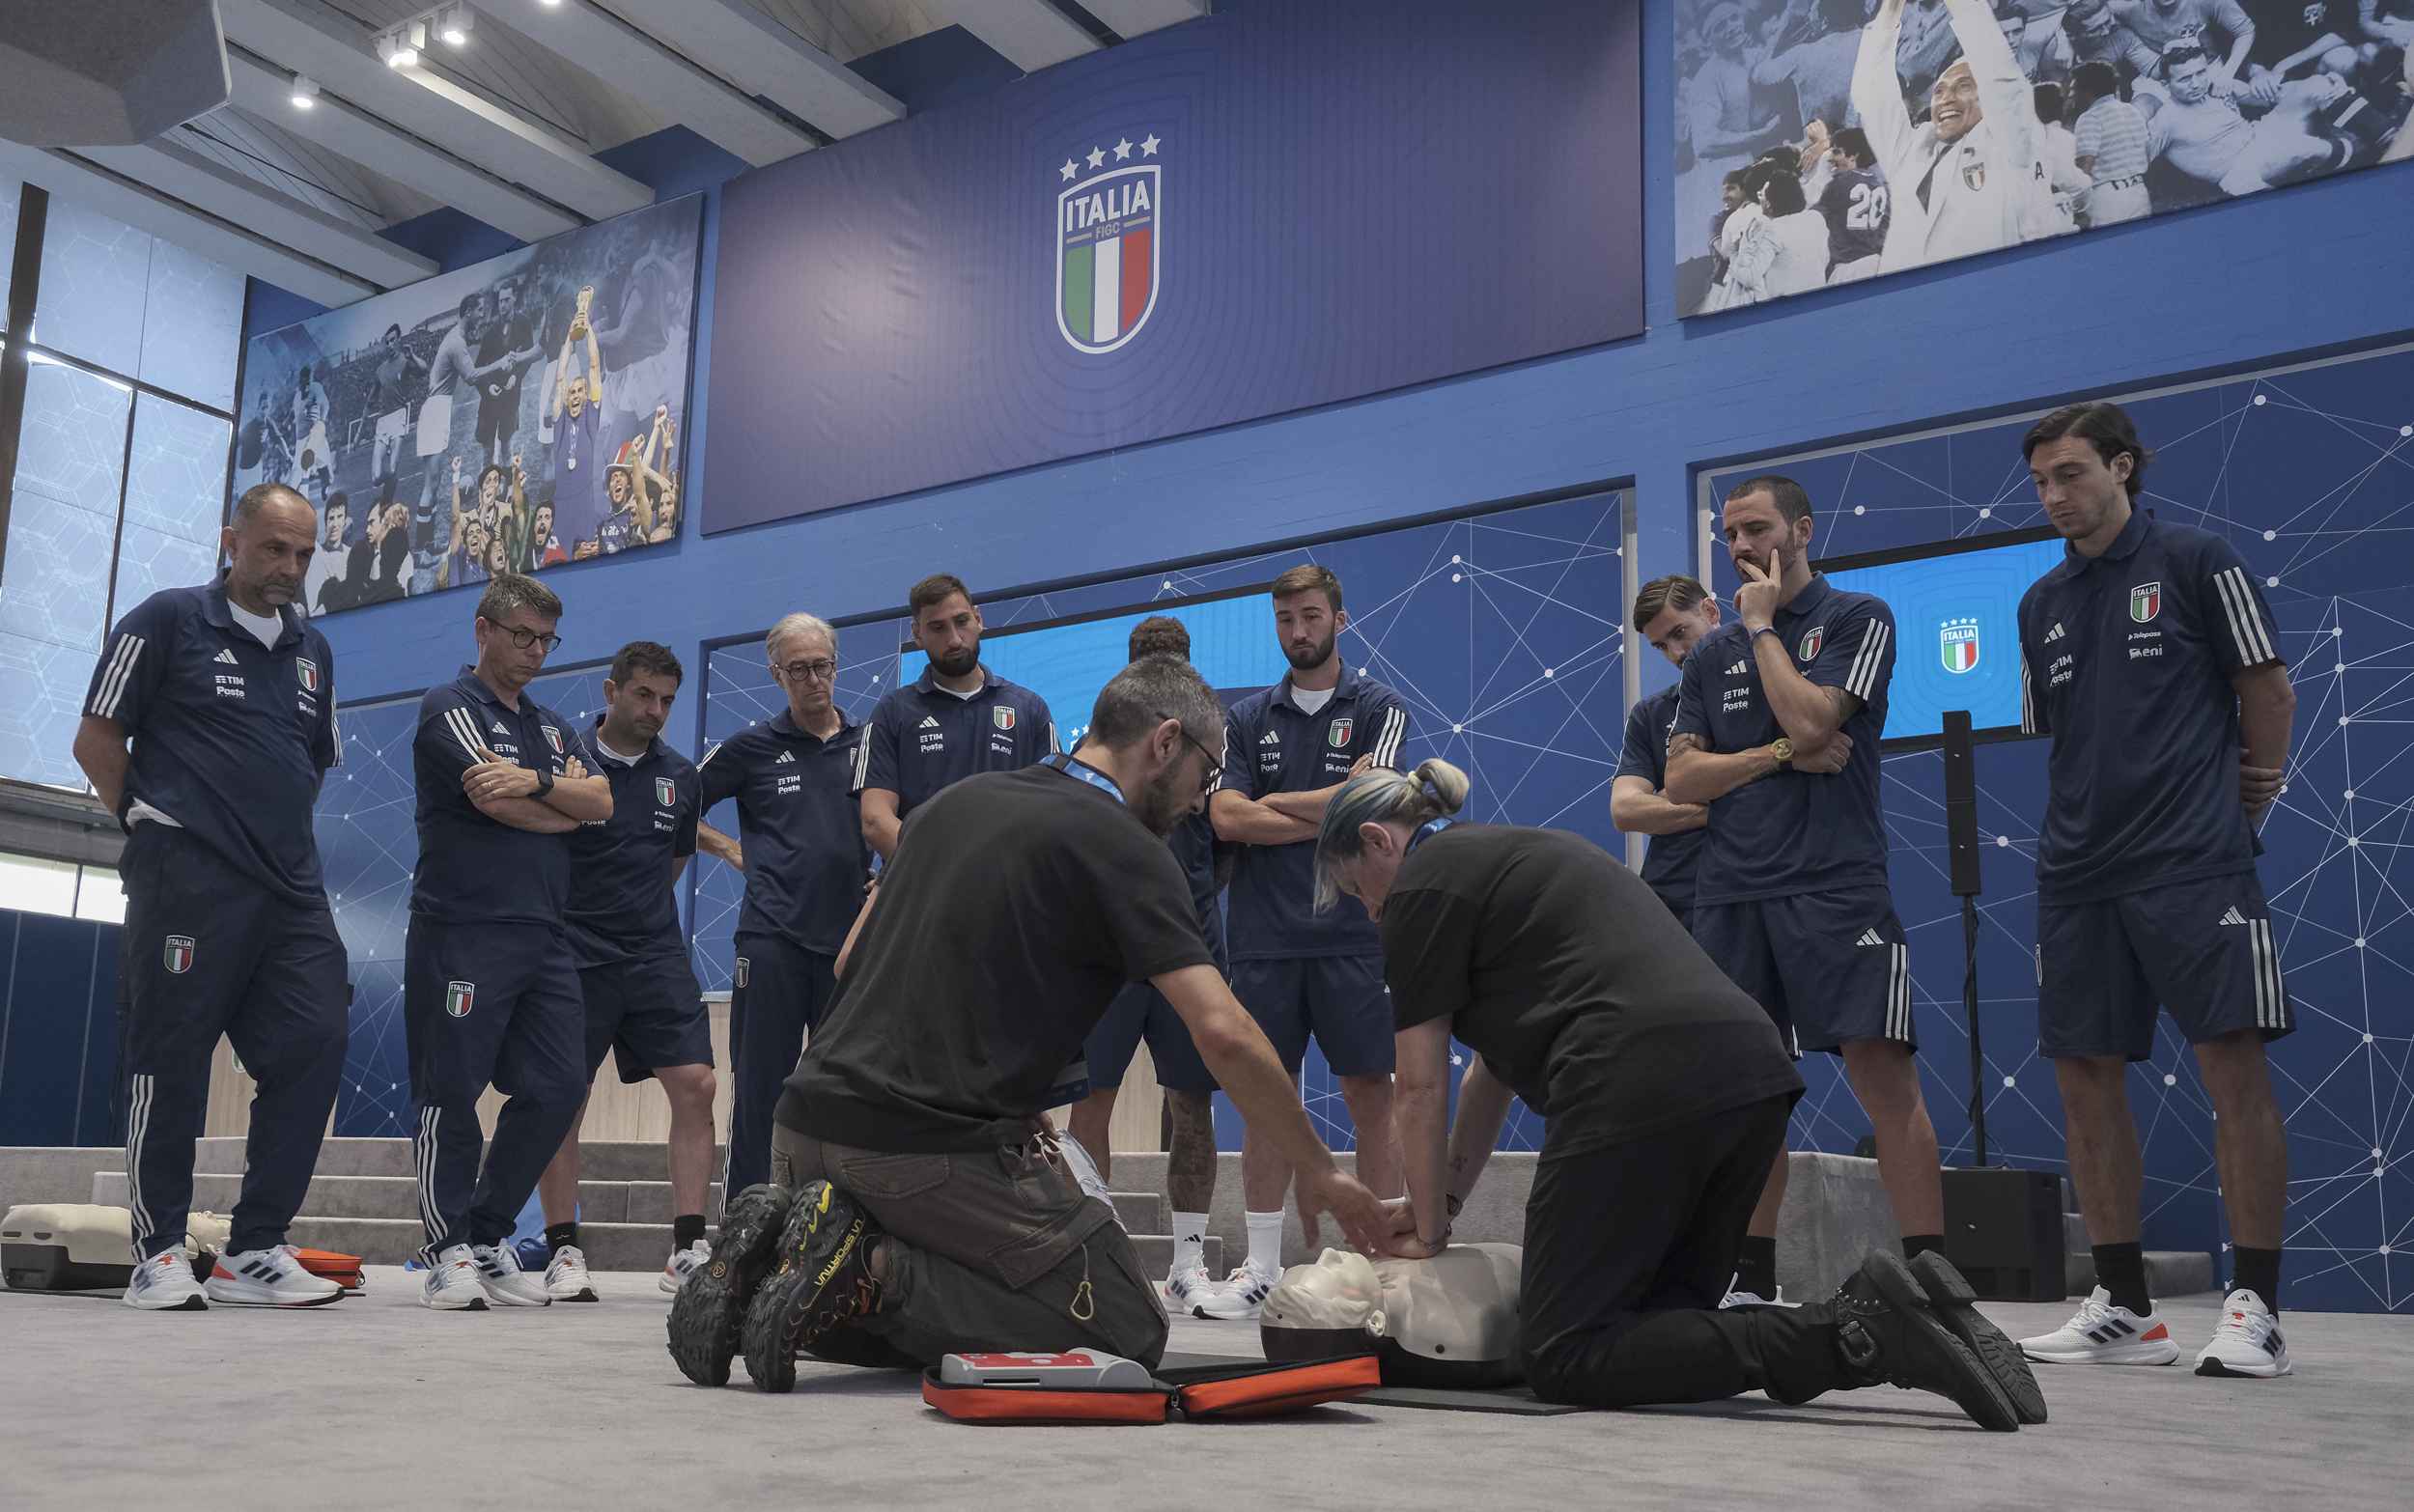 CPR Training with the Azzurri in Coverciano